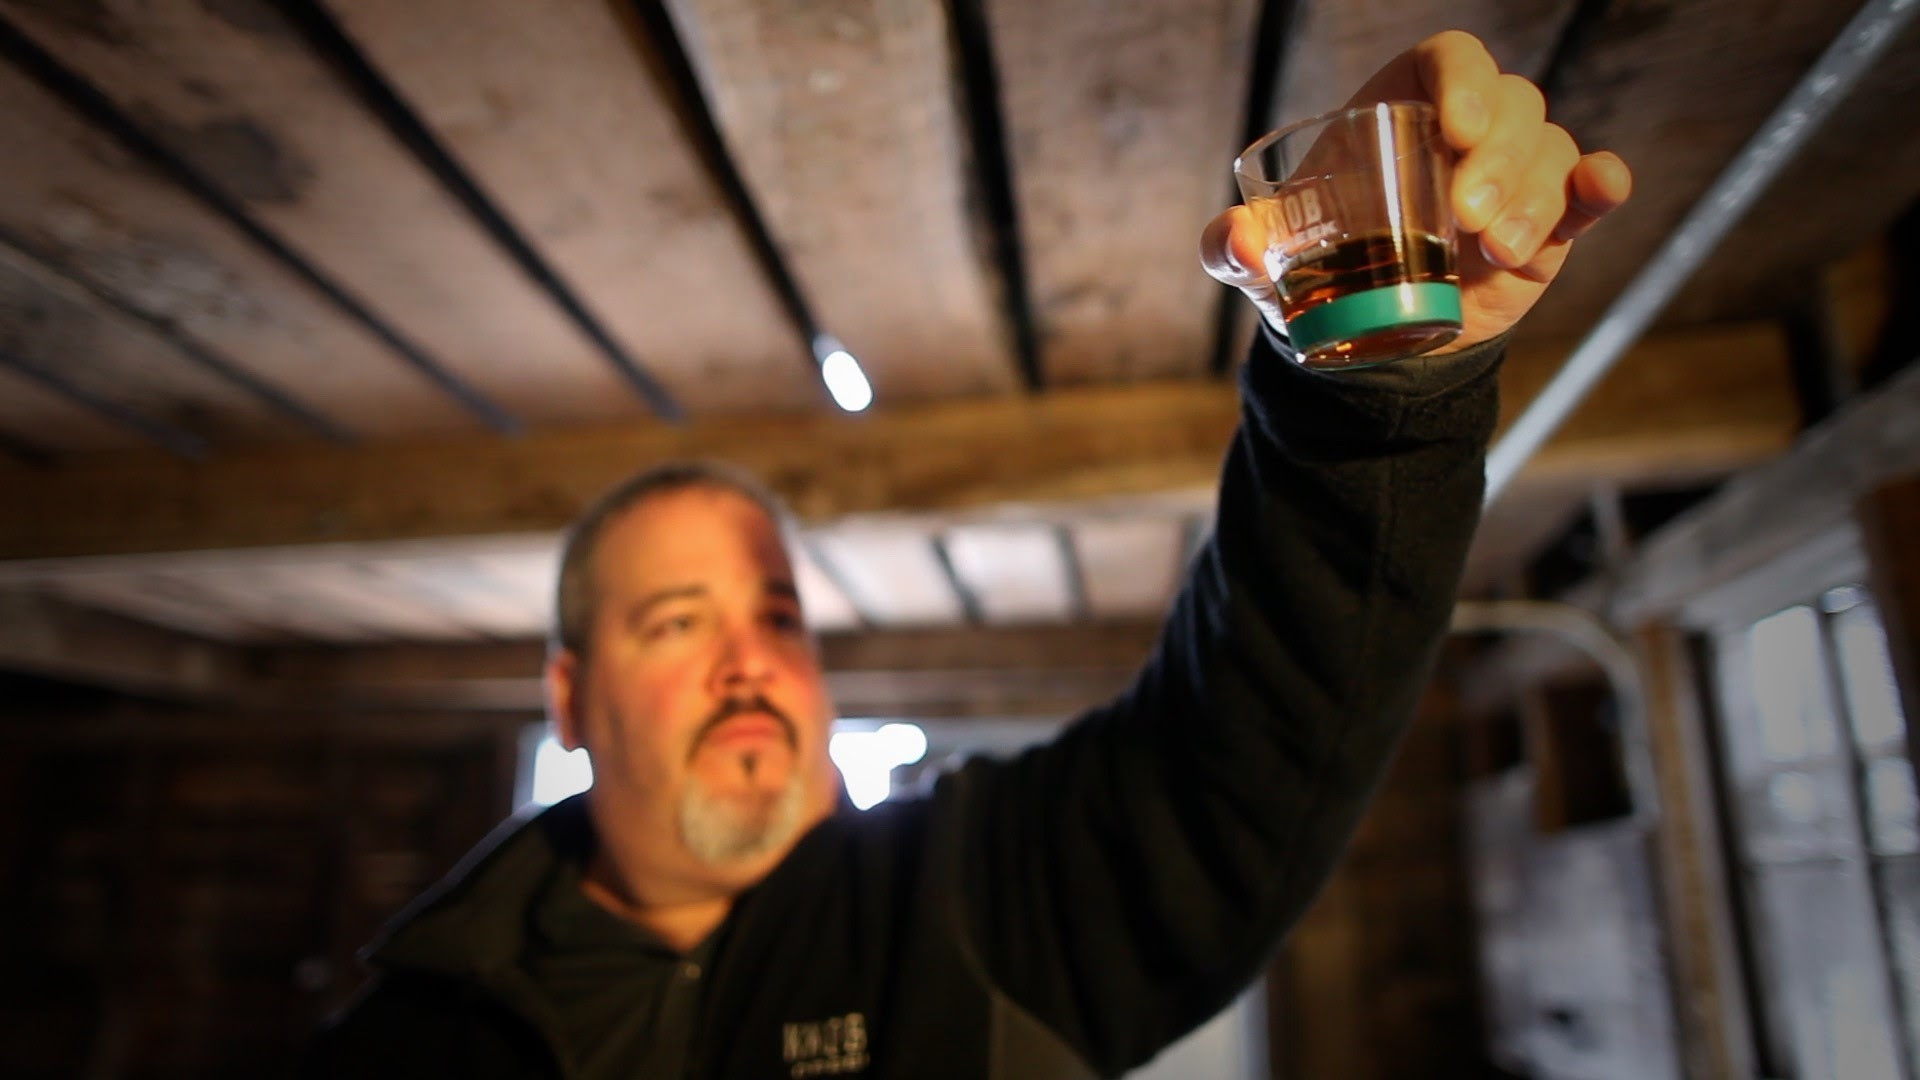 Mark Roy, with the New Hampshire Liquor Commission, traveled with a team to the Jim Beam Distillery to hand-select eight barrels of Knob Creek Single Barrel Reserve and to learn about the Jim Beam Distillery’s whiskey-making process and tradition.